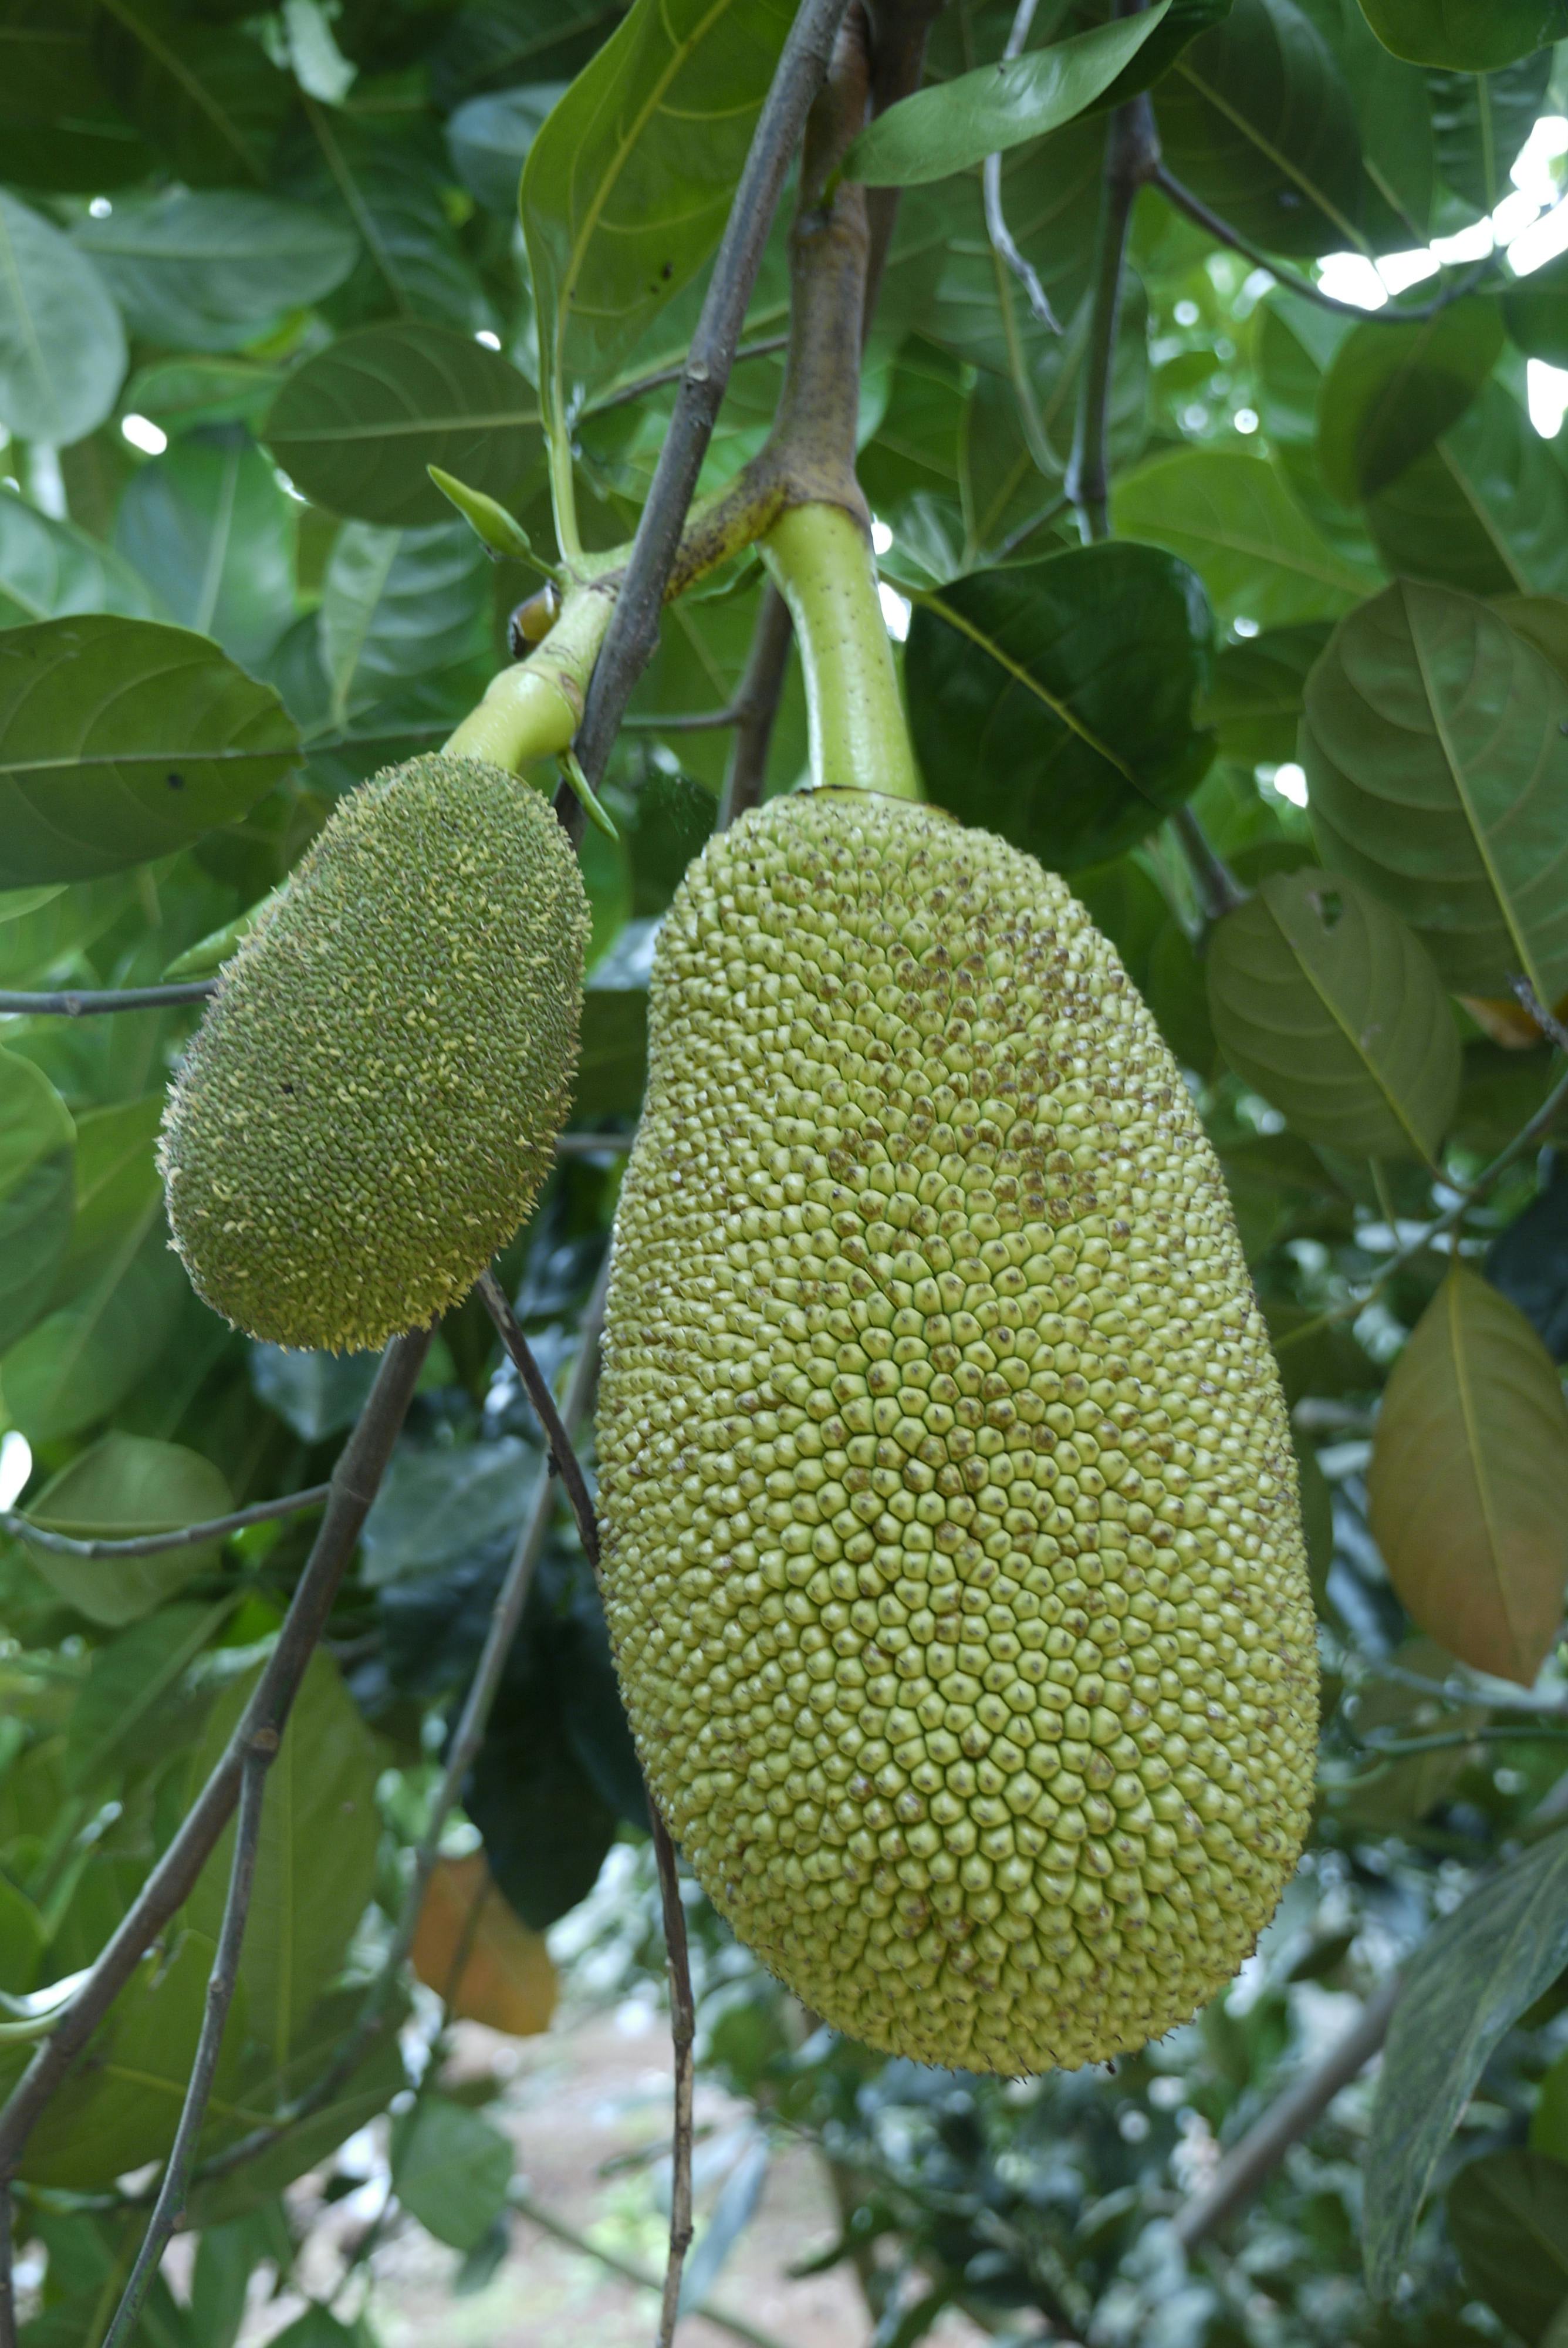 Free stock photo of agriculture, farming, jack fruit